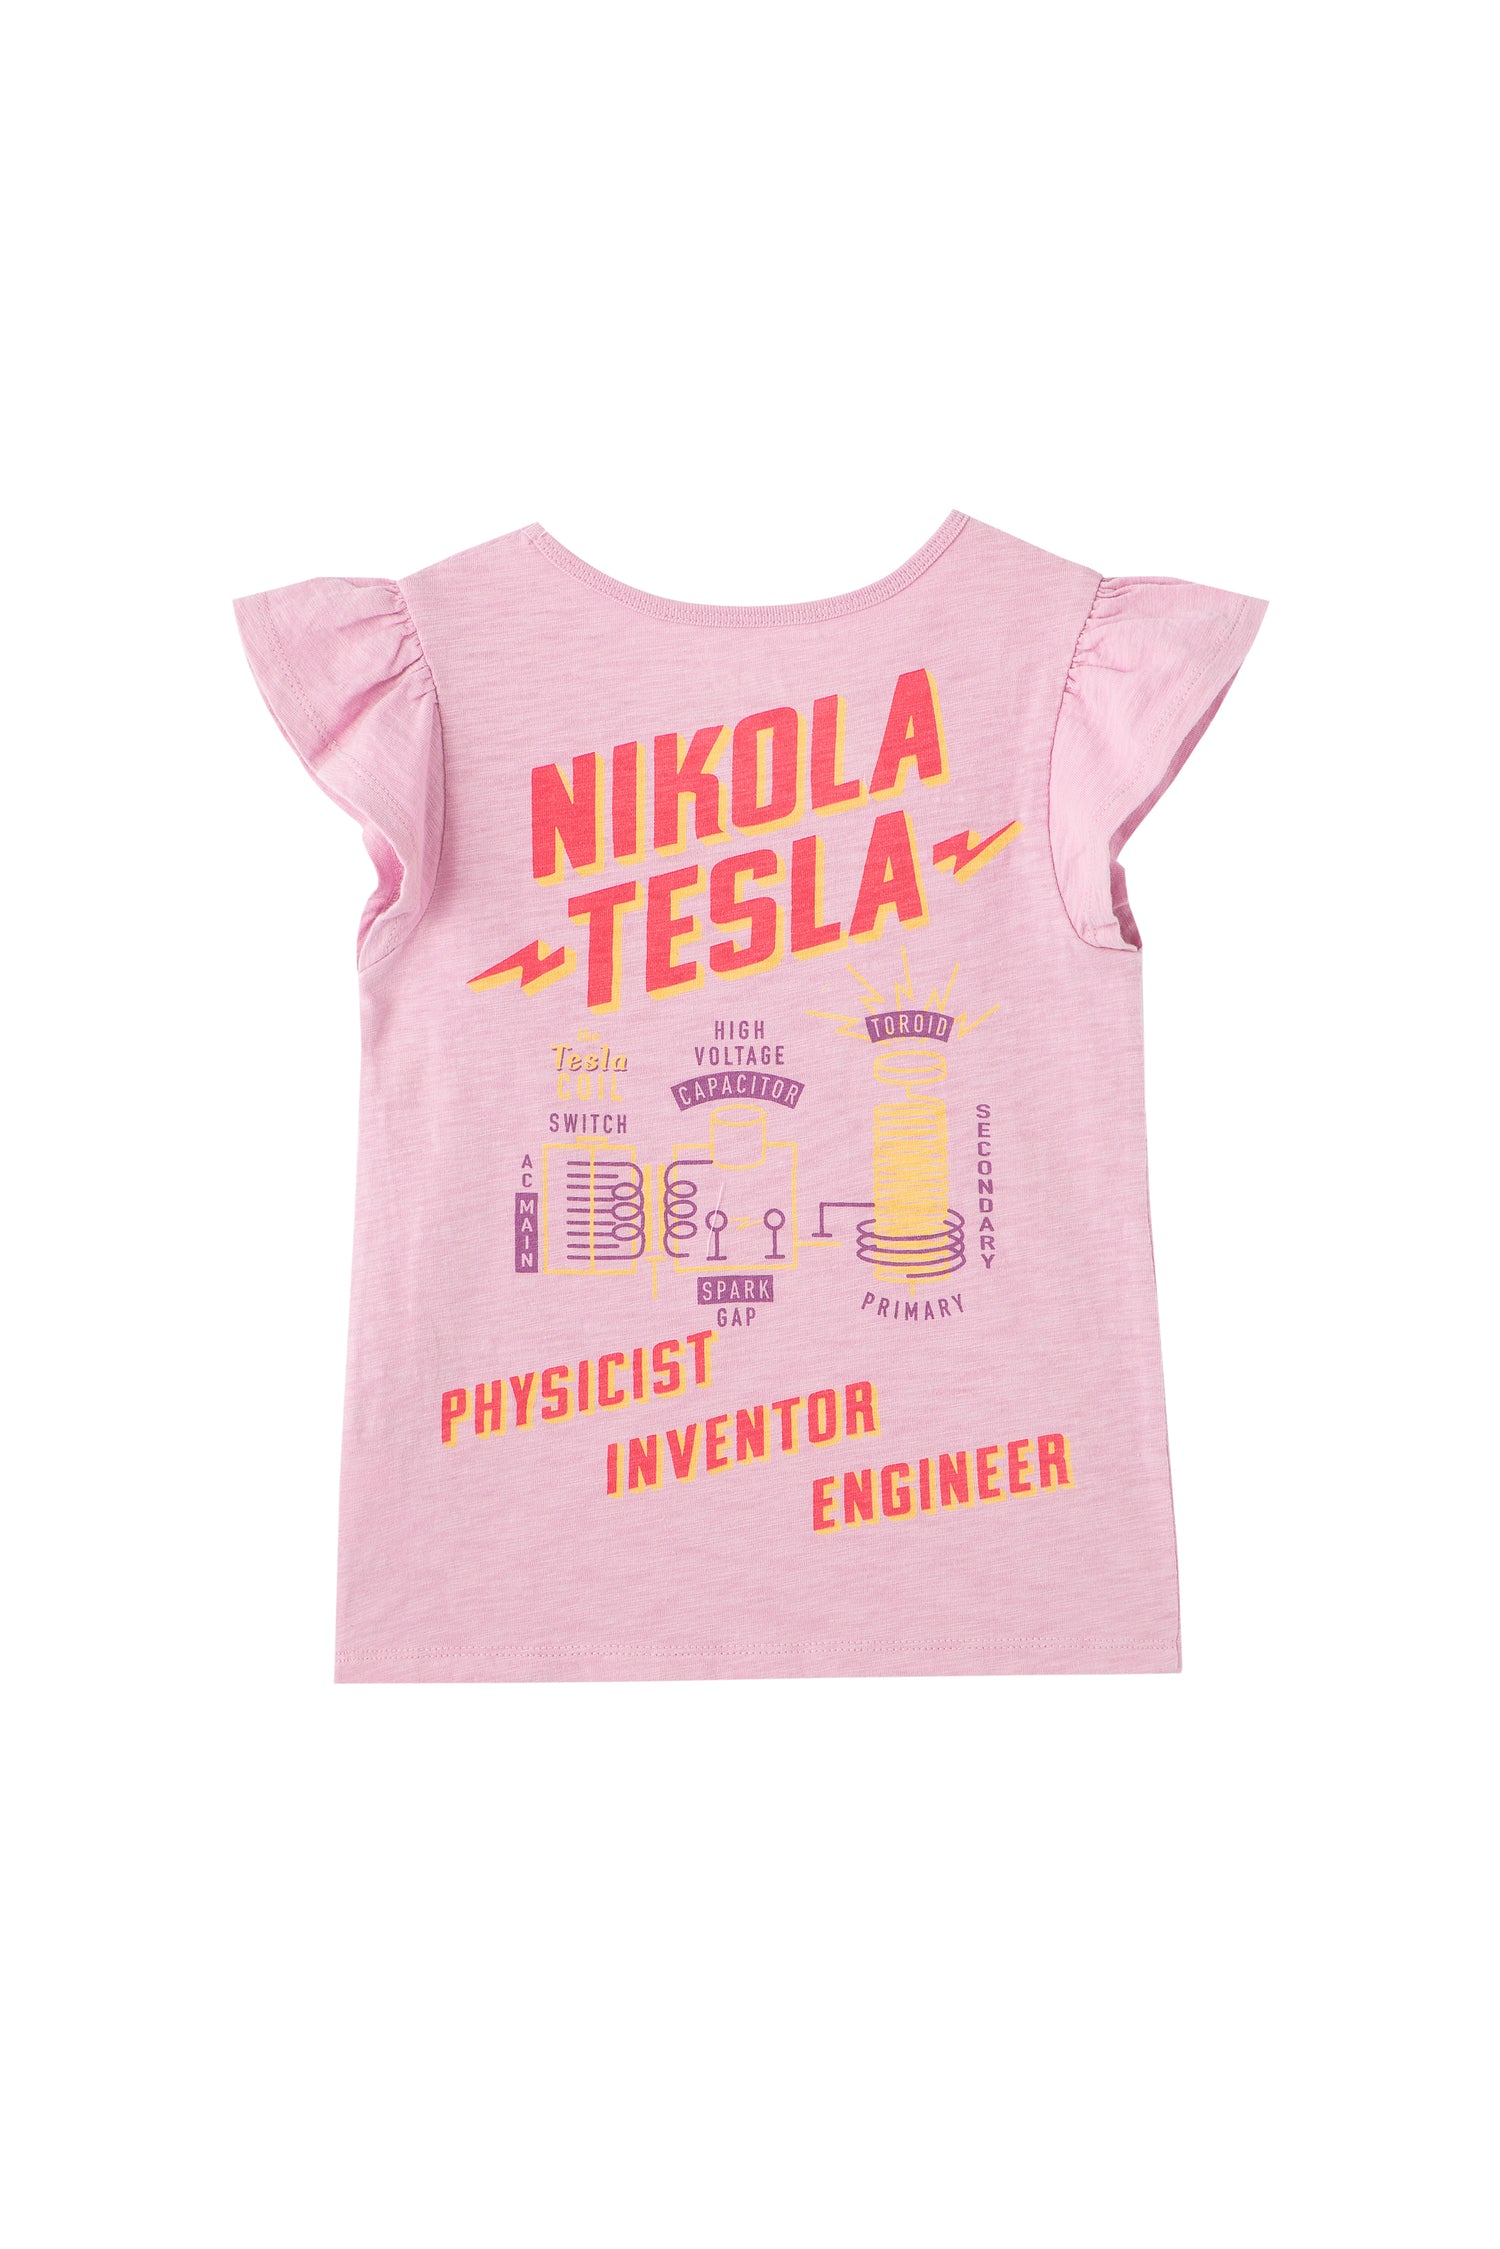 Pink cut-off t-shirt with text and facts about Nikola Tesla